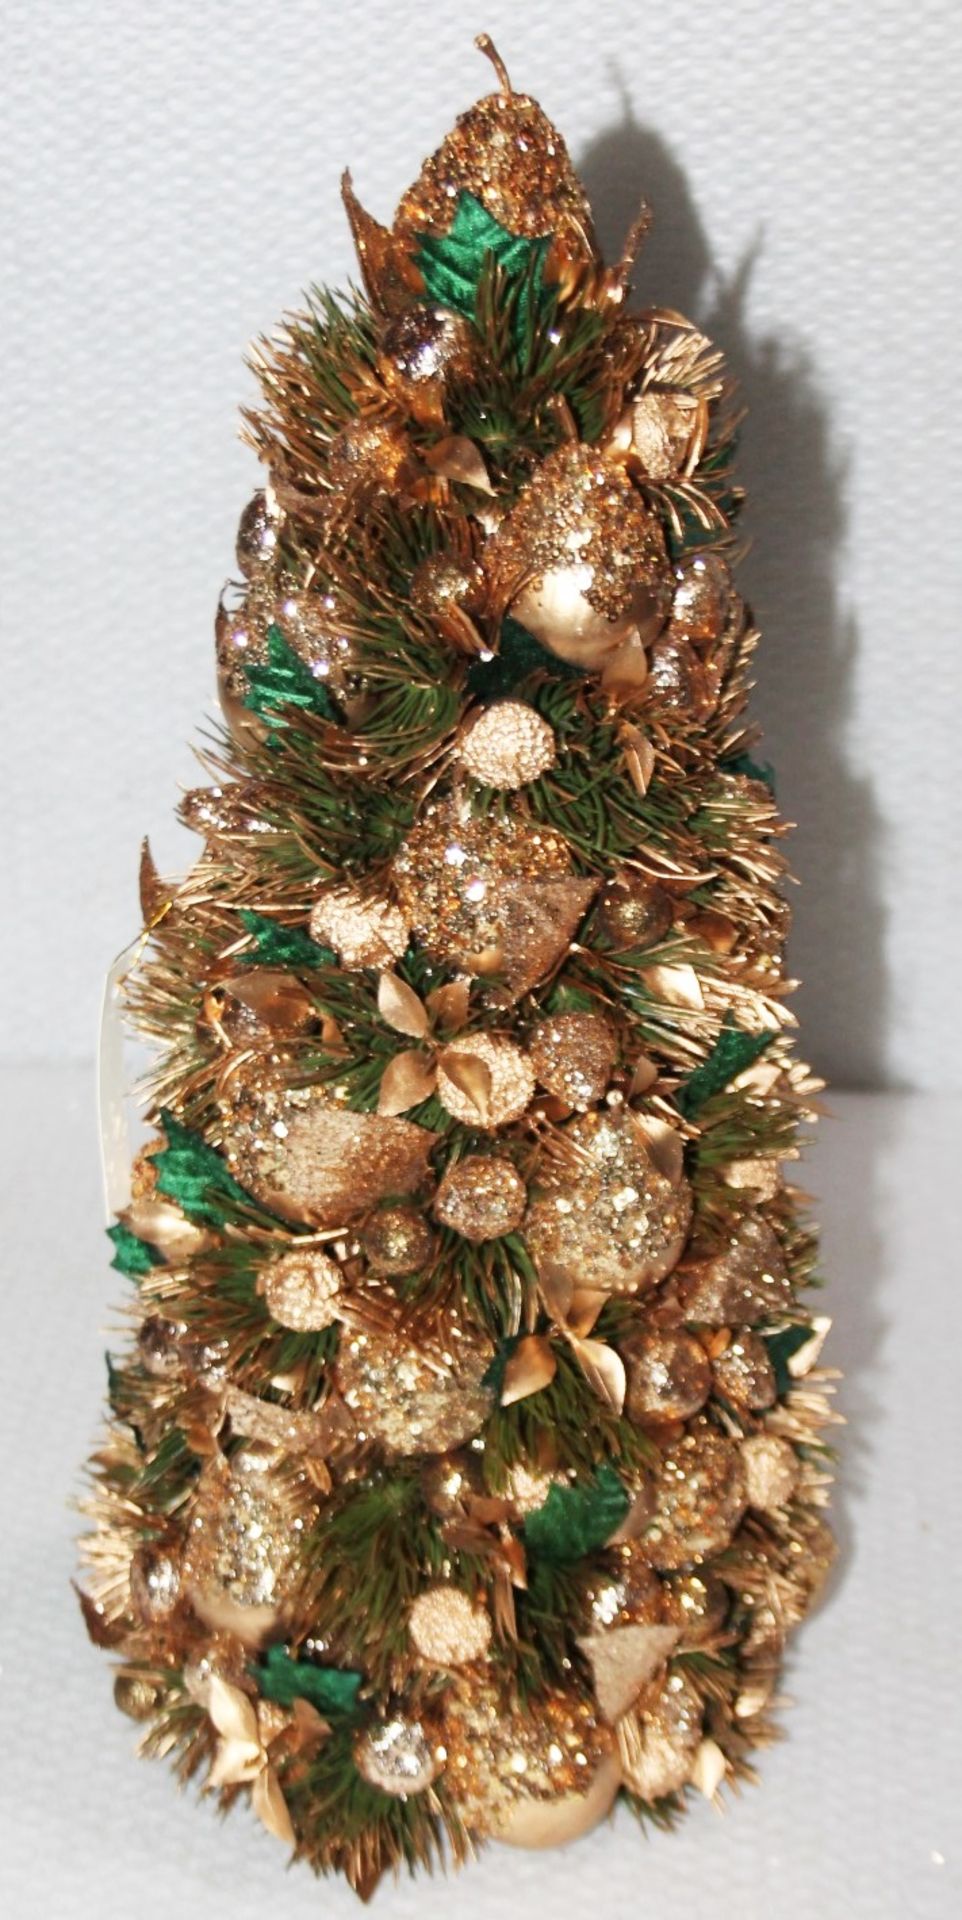 1 x SALZBURG CREATIONS Decorative 'Pear Tree' Ornament In Gold & Green - Original Price £300.00 - Image 3 of 9